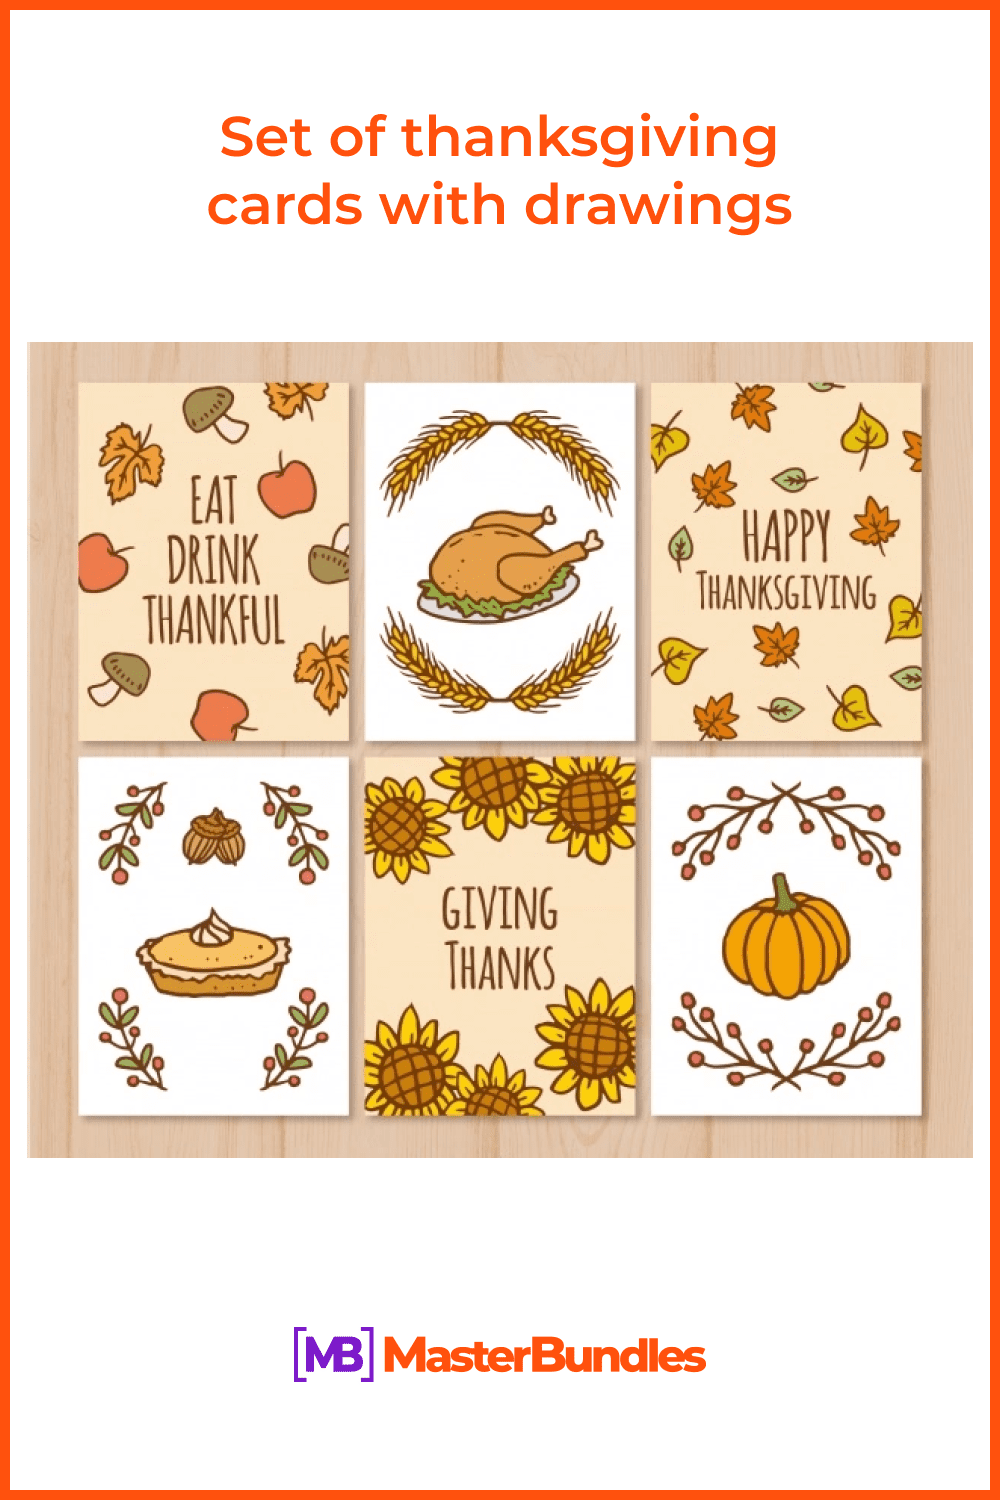 Set of thanksgiving cards with drawings.